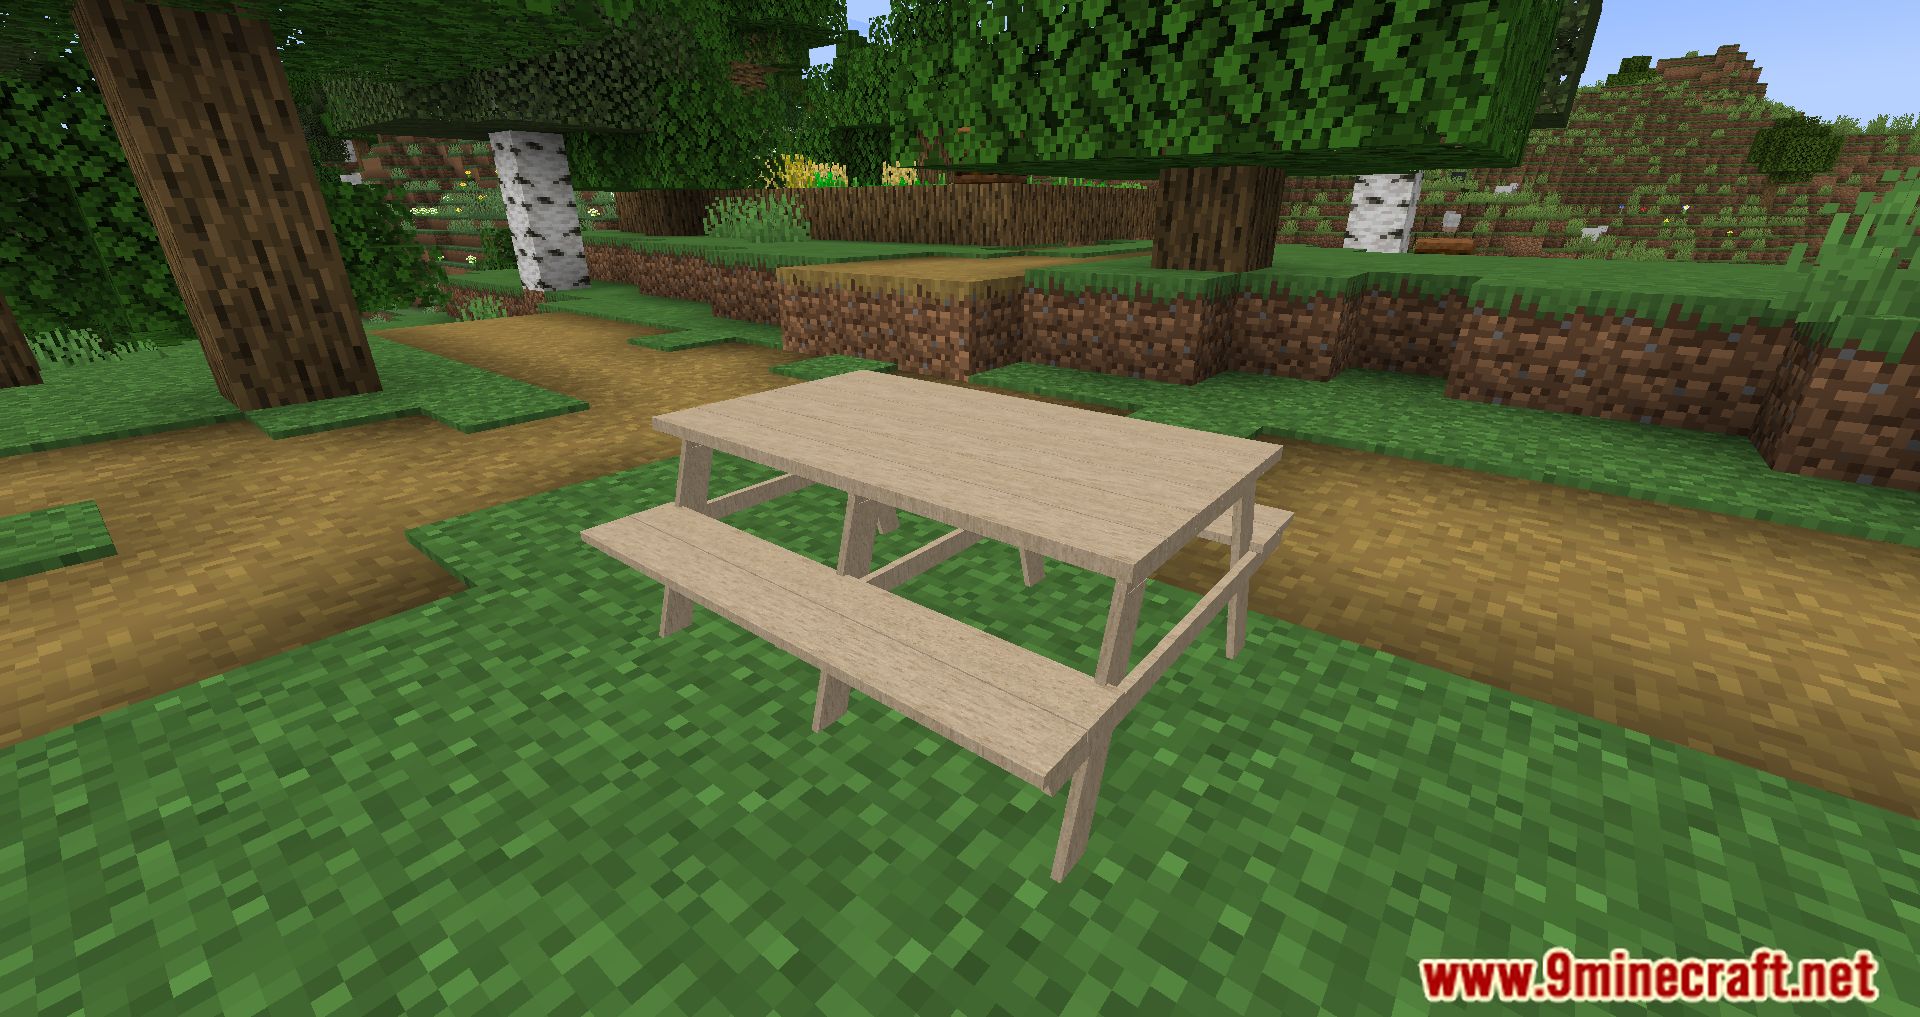 Benched Mod (1.20.4, 1.19.4) - Bring Your Minecraft World To Life With The Benched Mod! 3